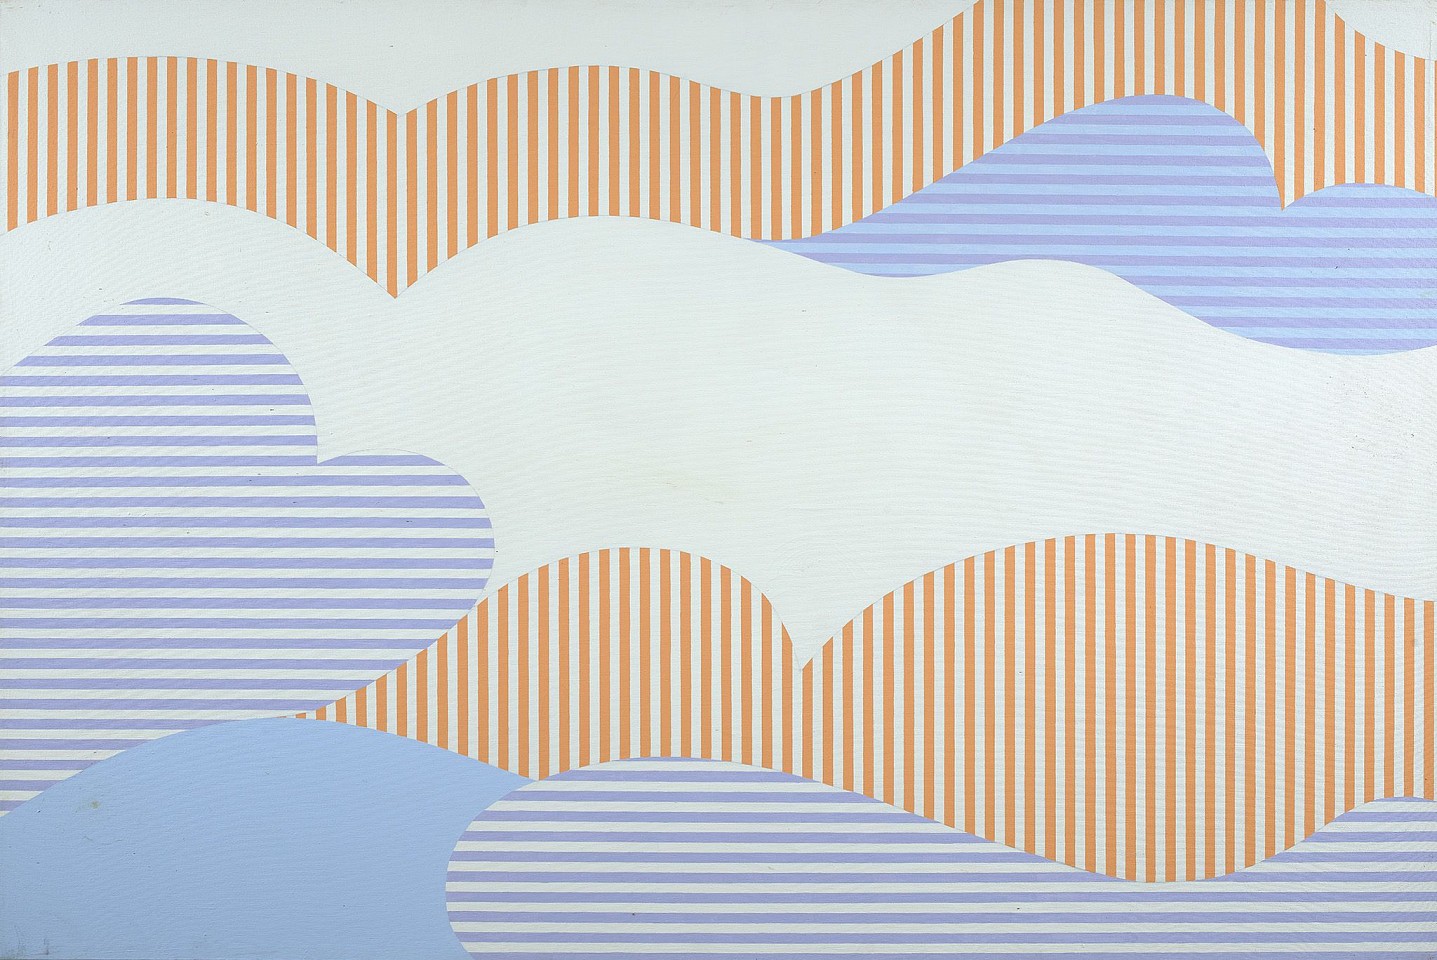 Mary Dill Henry, Mighty Clouds of Joy Come Rolling In, 1972
Acrylic on canvas, 48 x 72 in. (121.9 x 182.9 cm)
MHEN-00060